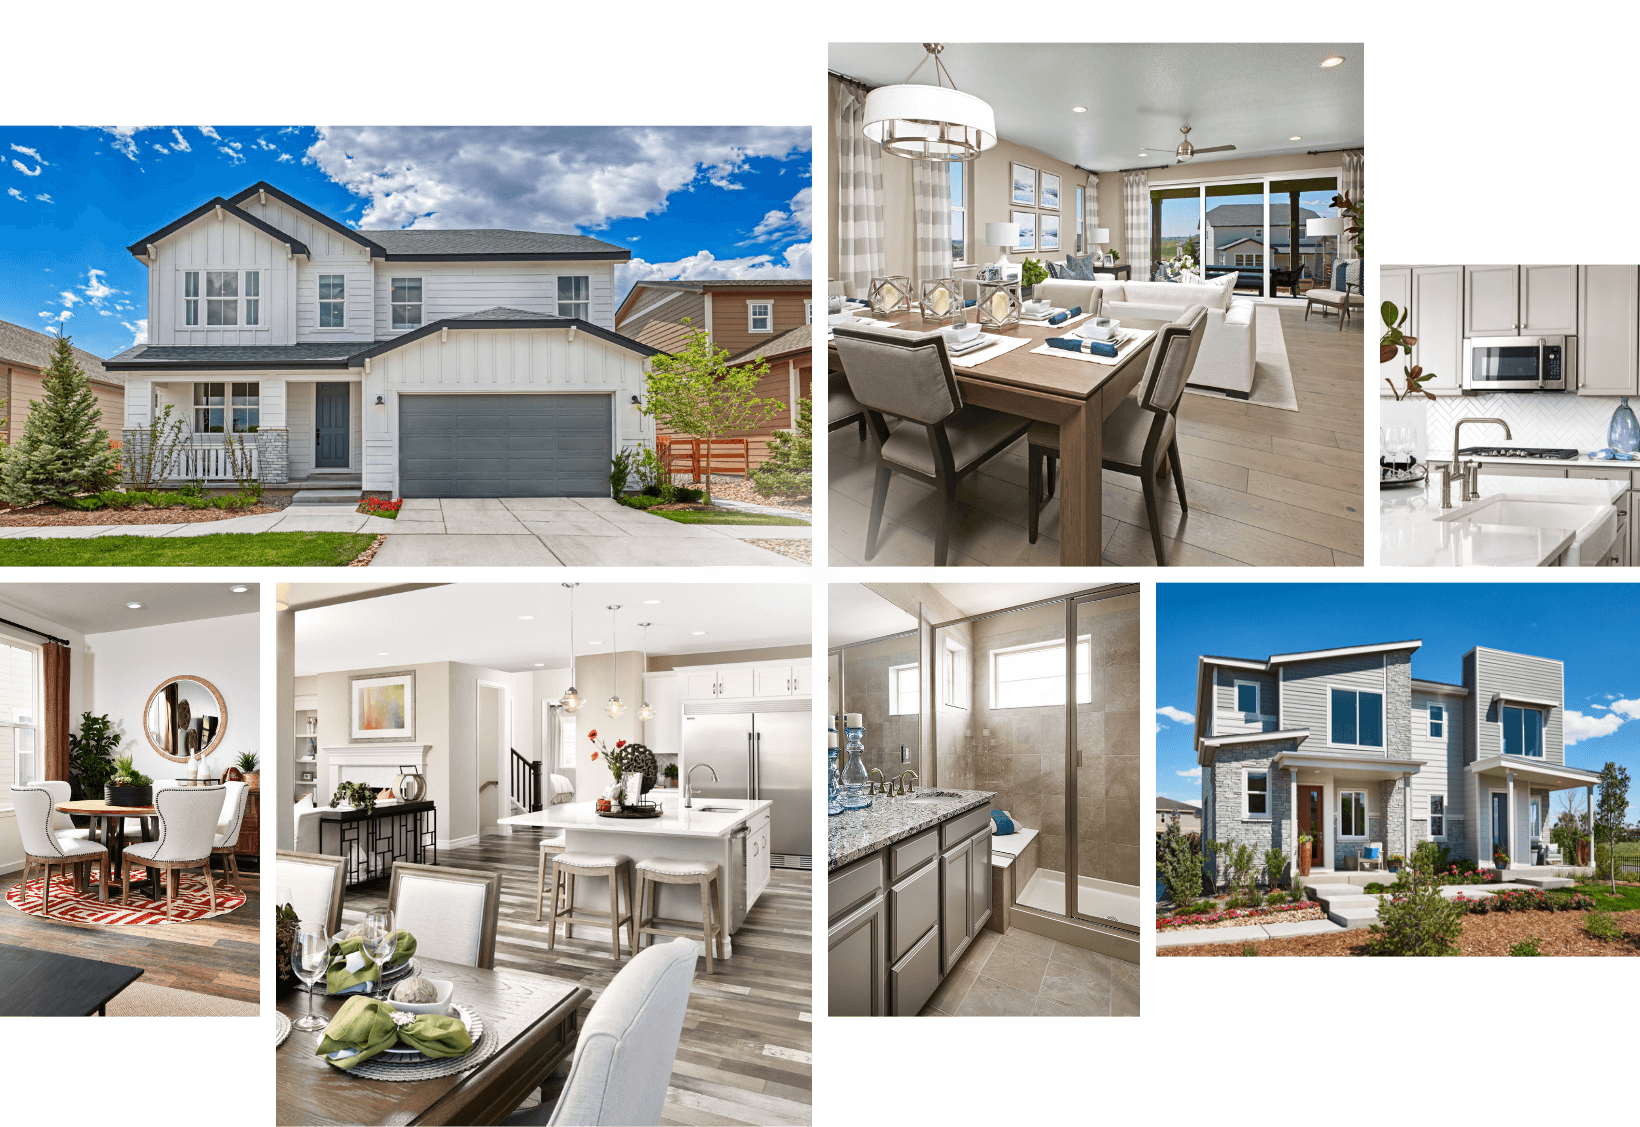 Collage of the highly-designed kitchens, dining rooms, bathrooms and homes available in Loveland, Colorado in the Kinston community